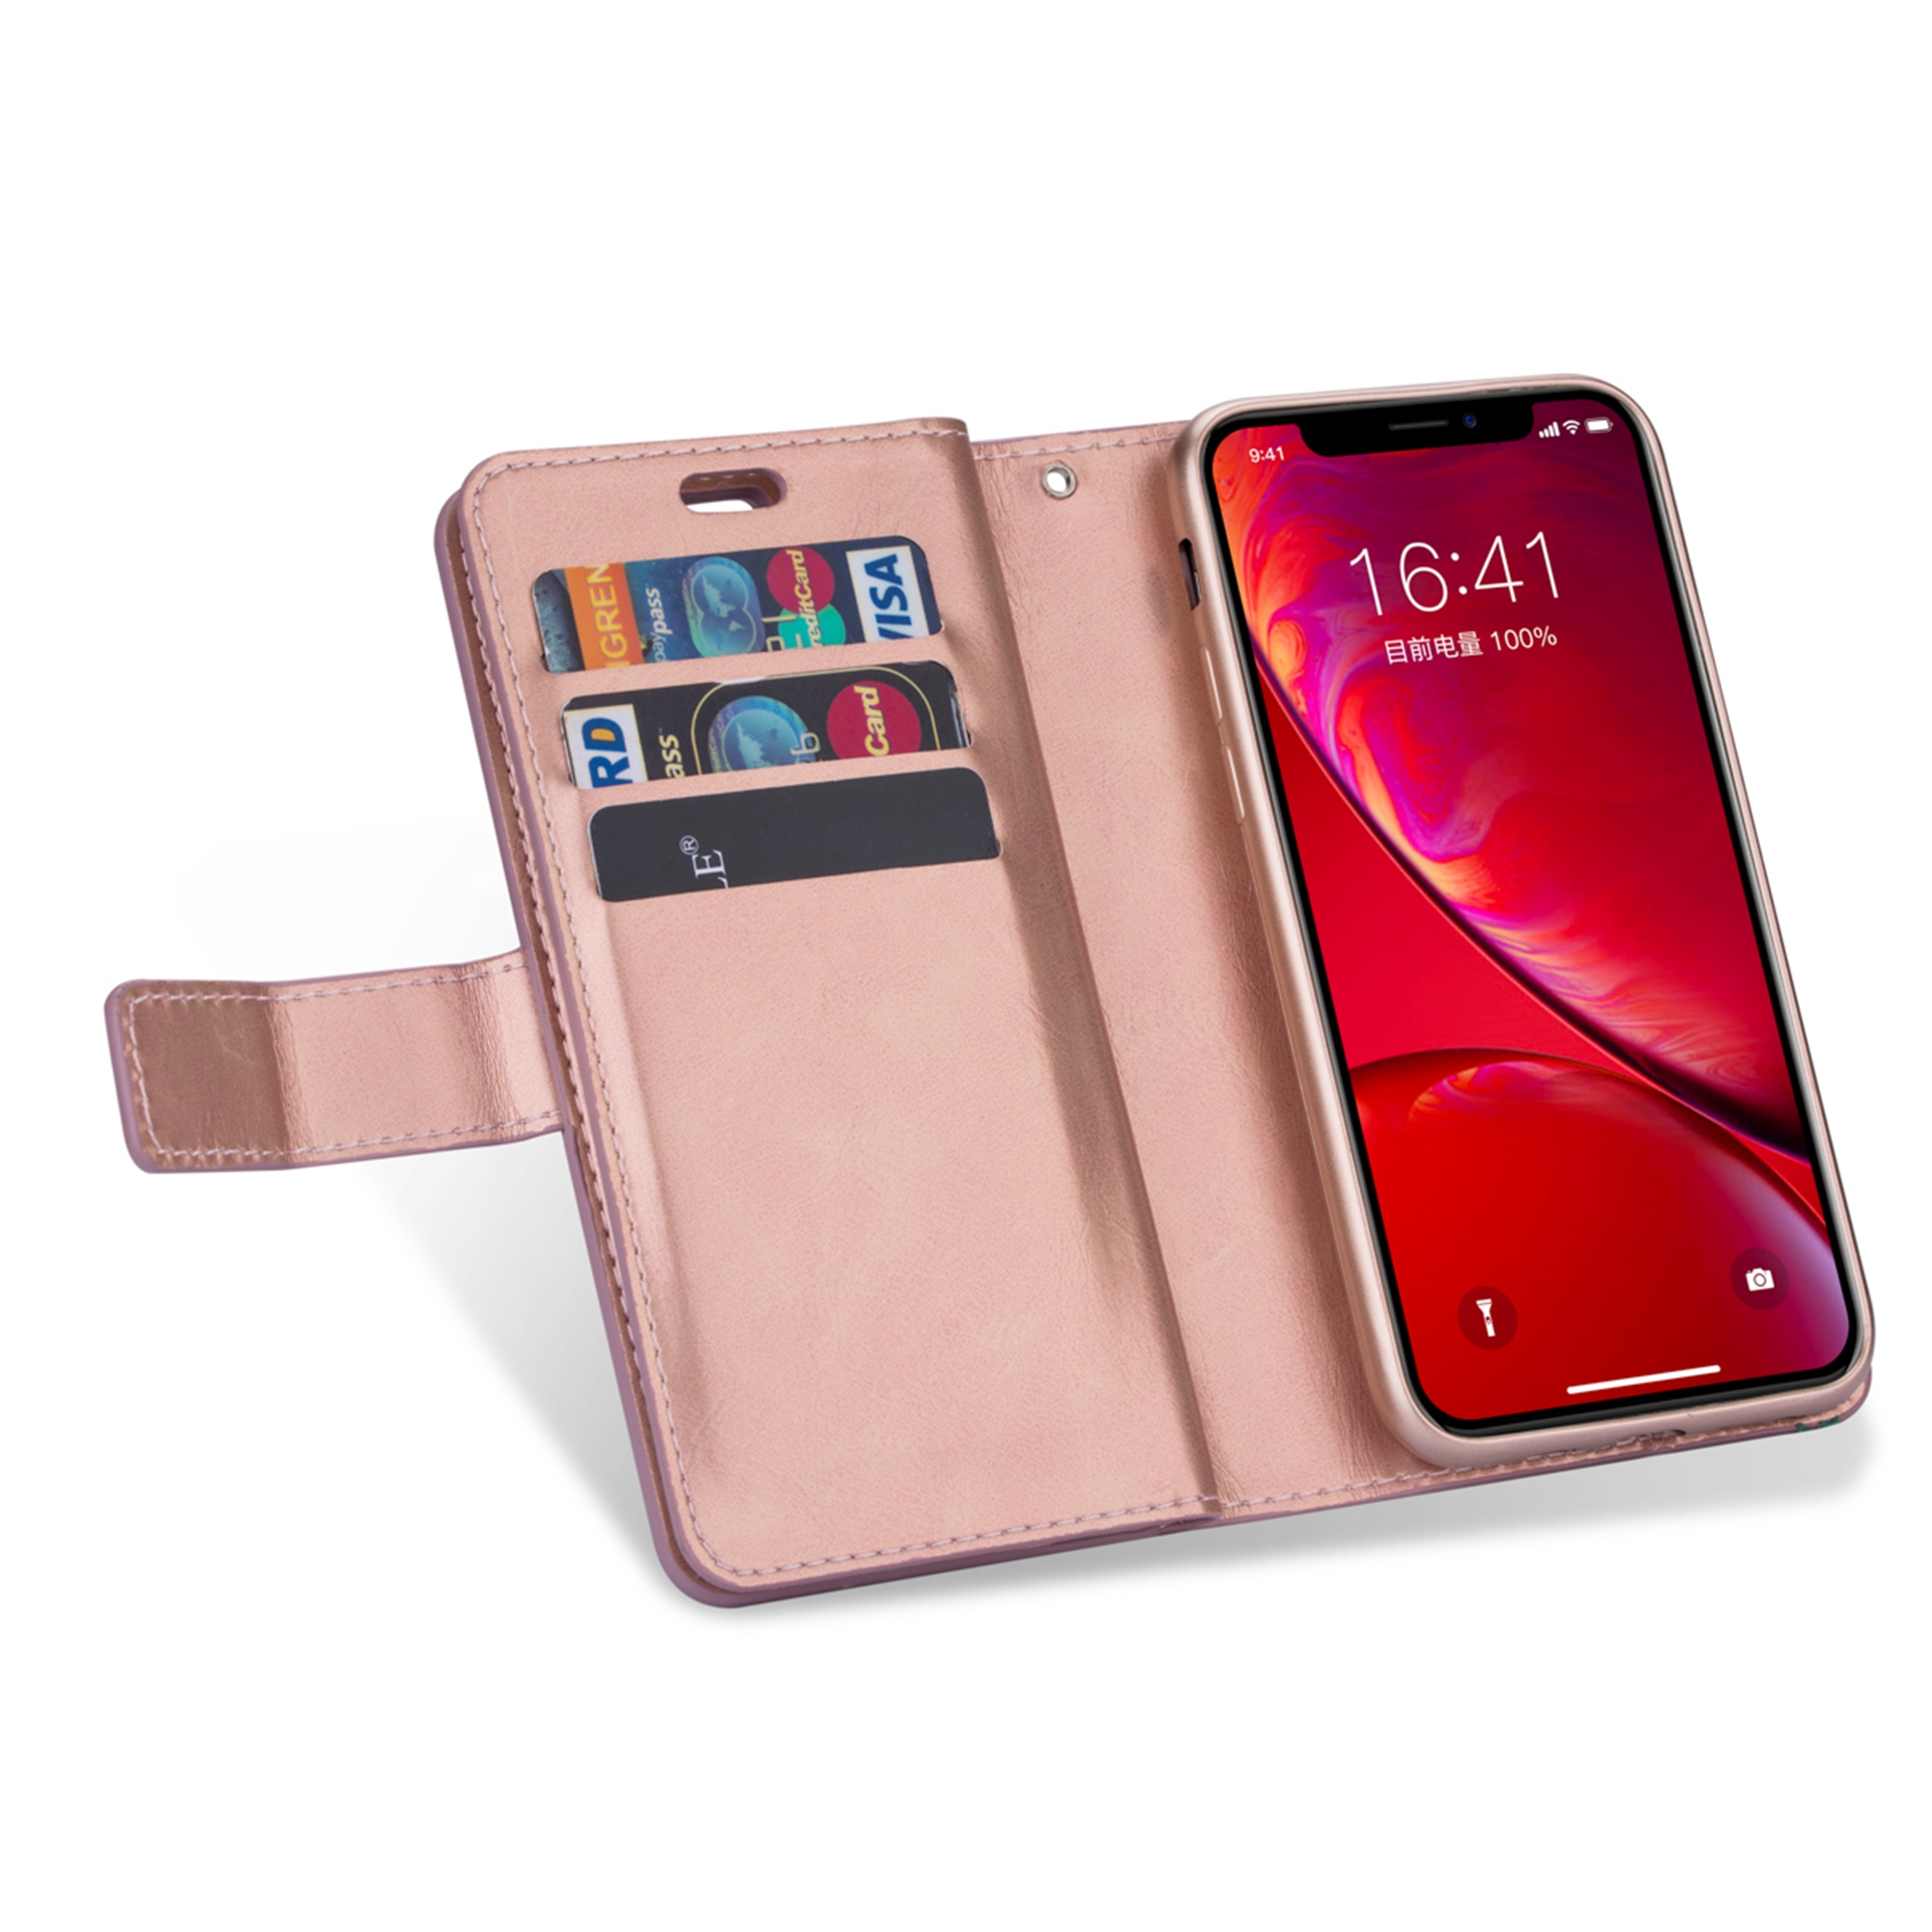 iPhone 11 6.1 inch Wallet Case, Dteck 9 Card Slots Premium Leather Zipper Purse case Flip Kickstand Folio Magnetic with Wrist Strap Credit Cash Cover For Apple iPhone 11, Rosegold - image 5 of 7